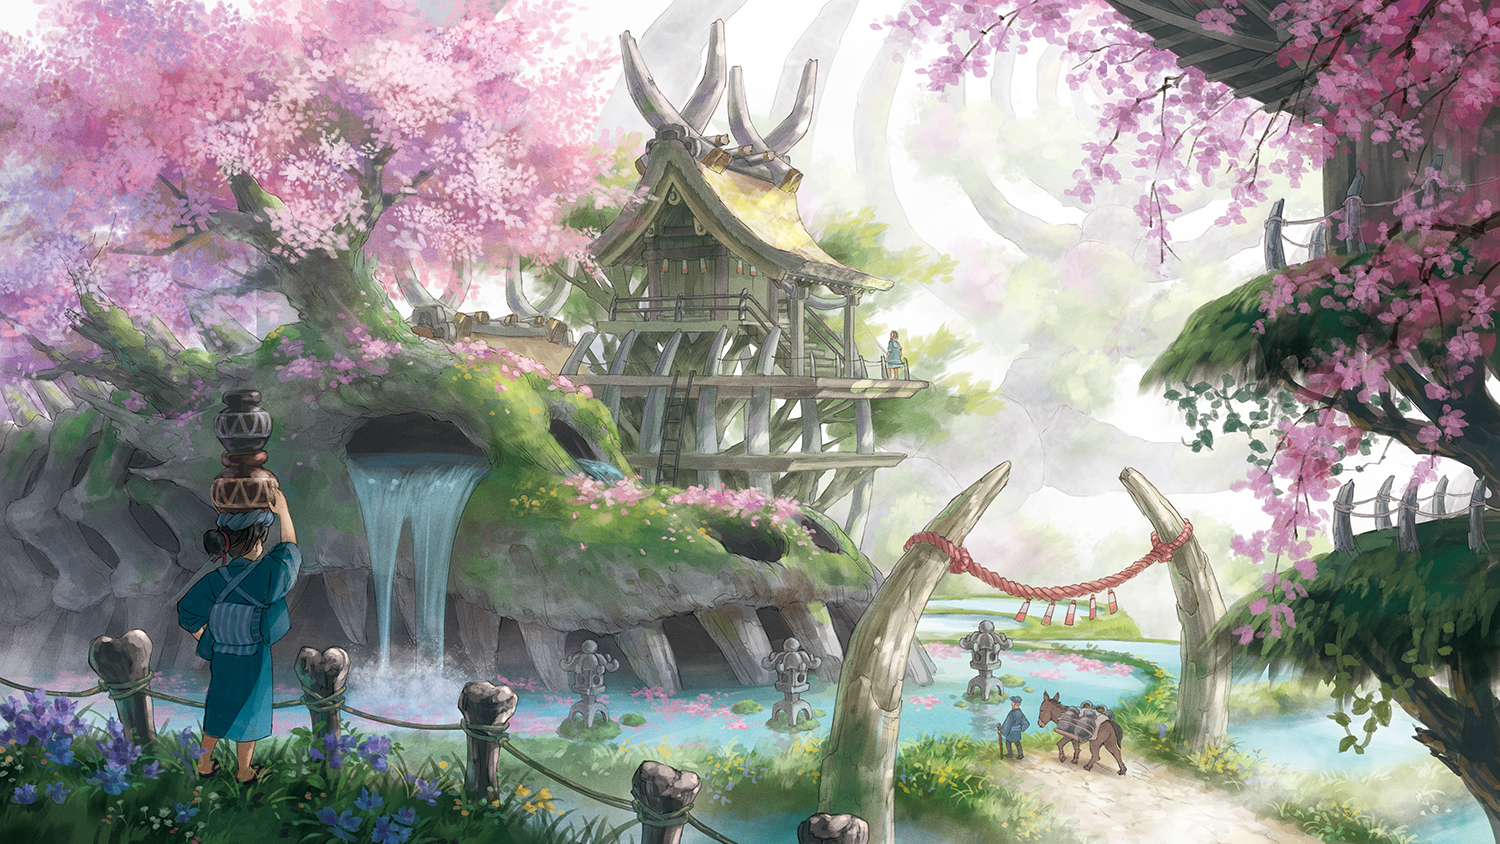 Anime 1500x844 Yukoiwase cherry blossom grass trees flowers water waterfall pond rear view skull forest path original characters donkey river fantasy castle anime girls nature